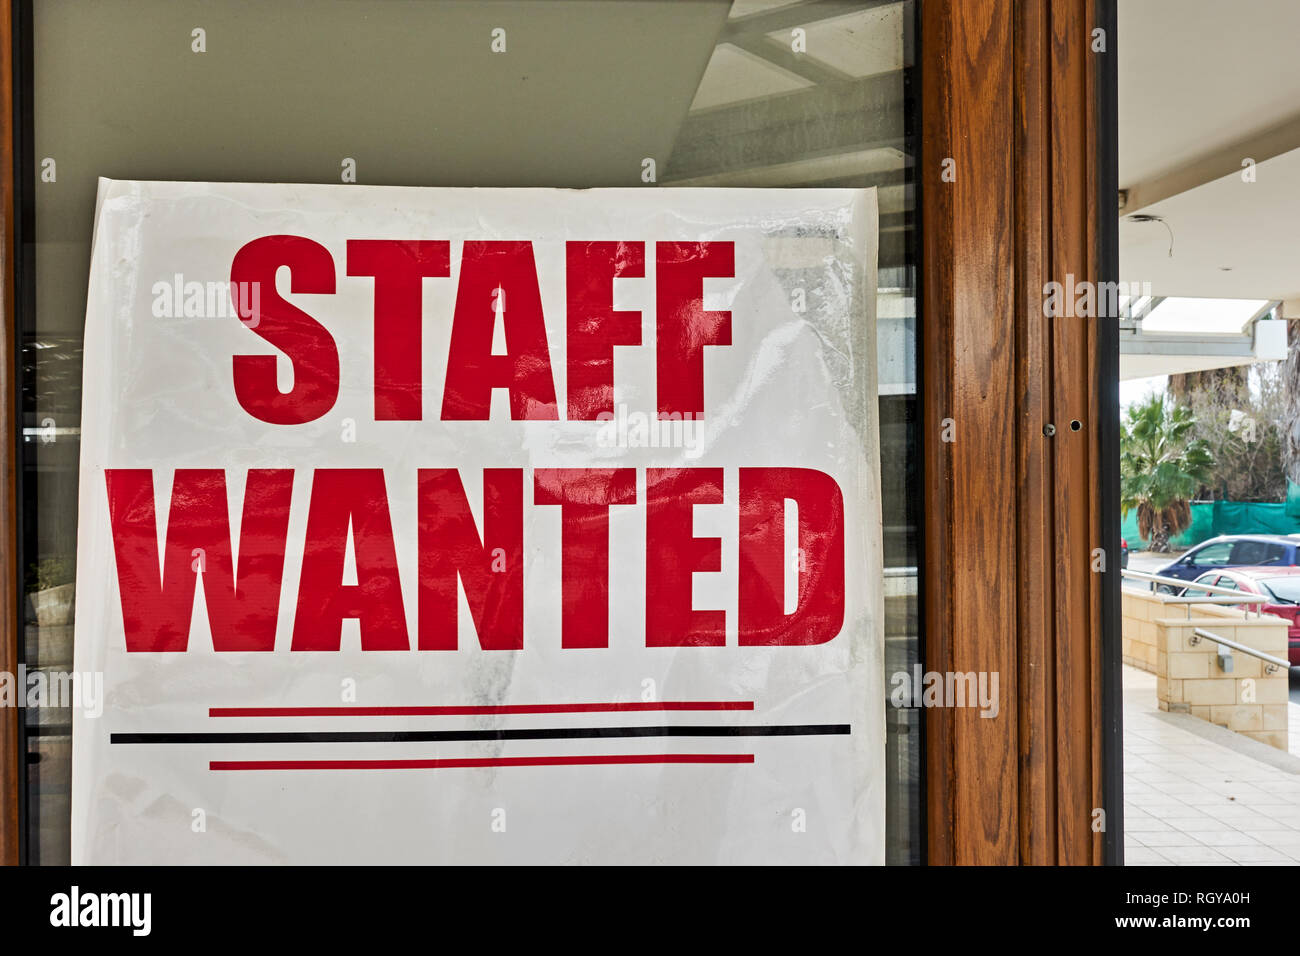 Staff wanted - job vacancy advertisement in a show-case Stock Photo